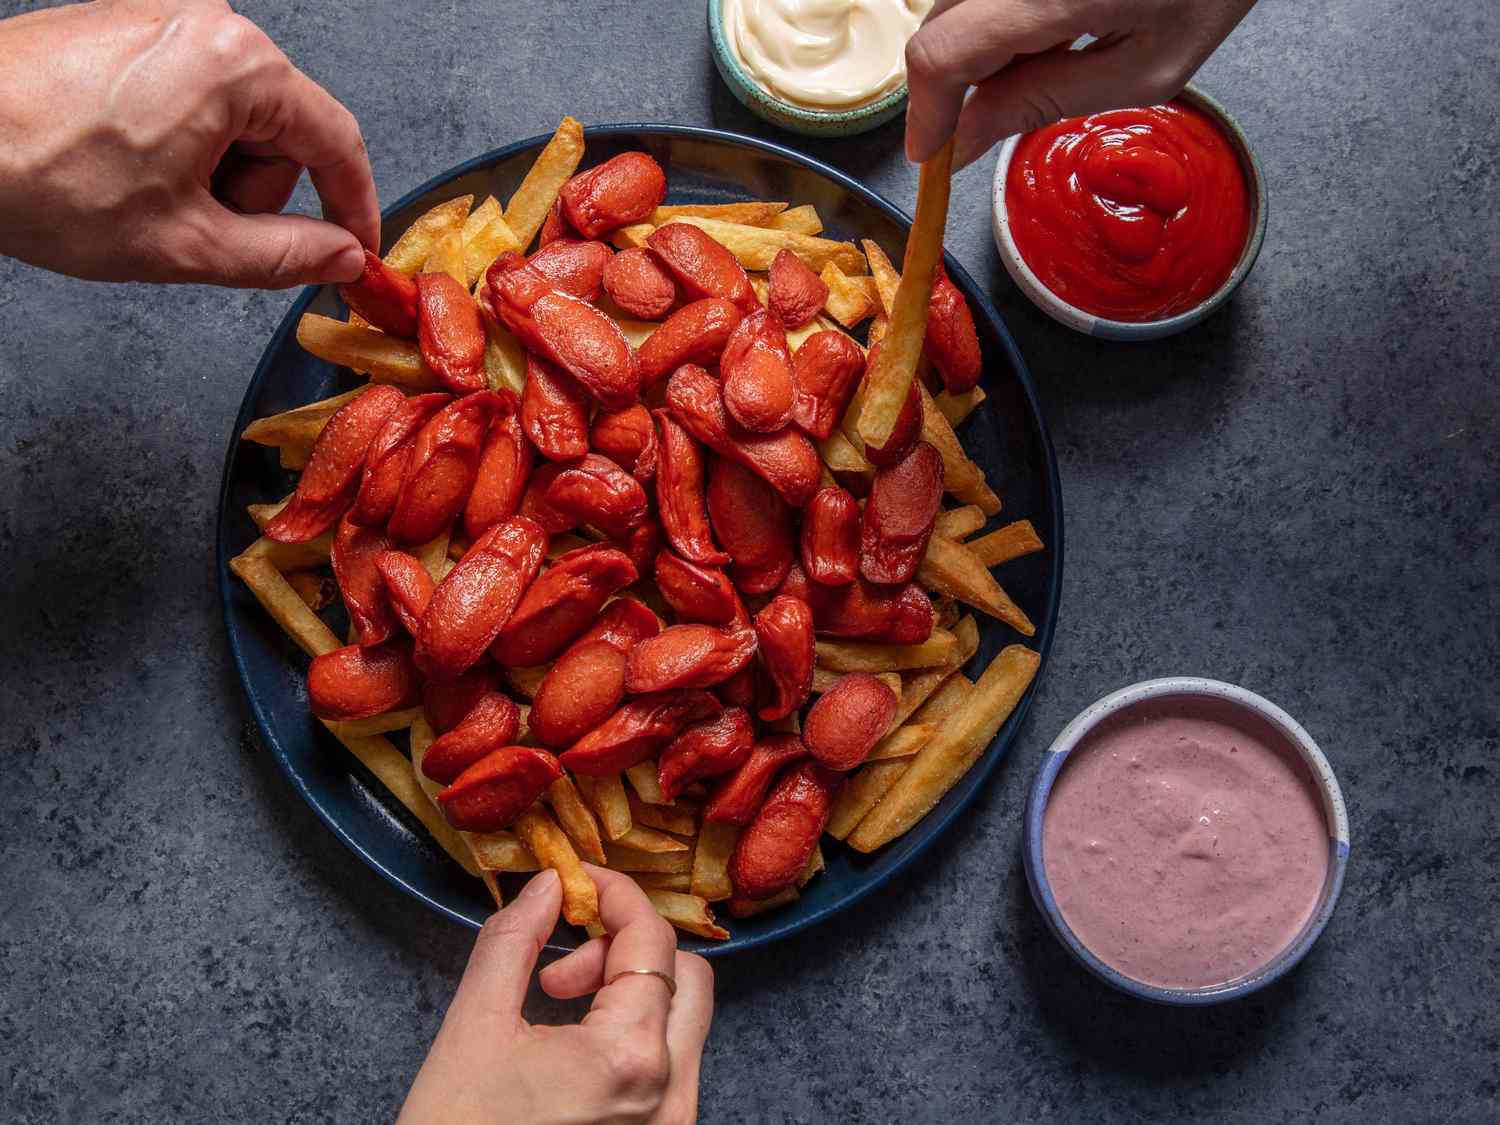 Hands grabbing French fries and hot dogs from a platter of salchipapas